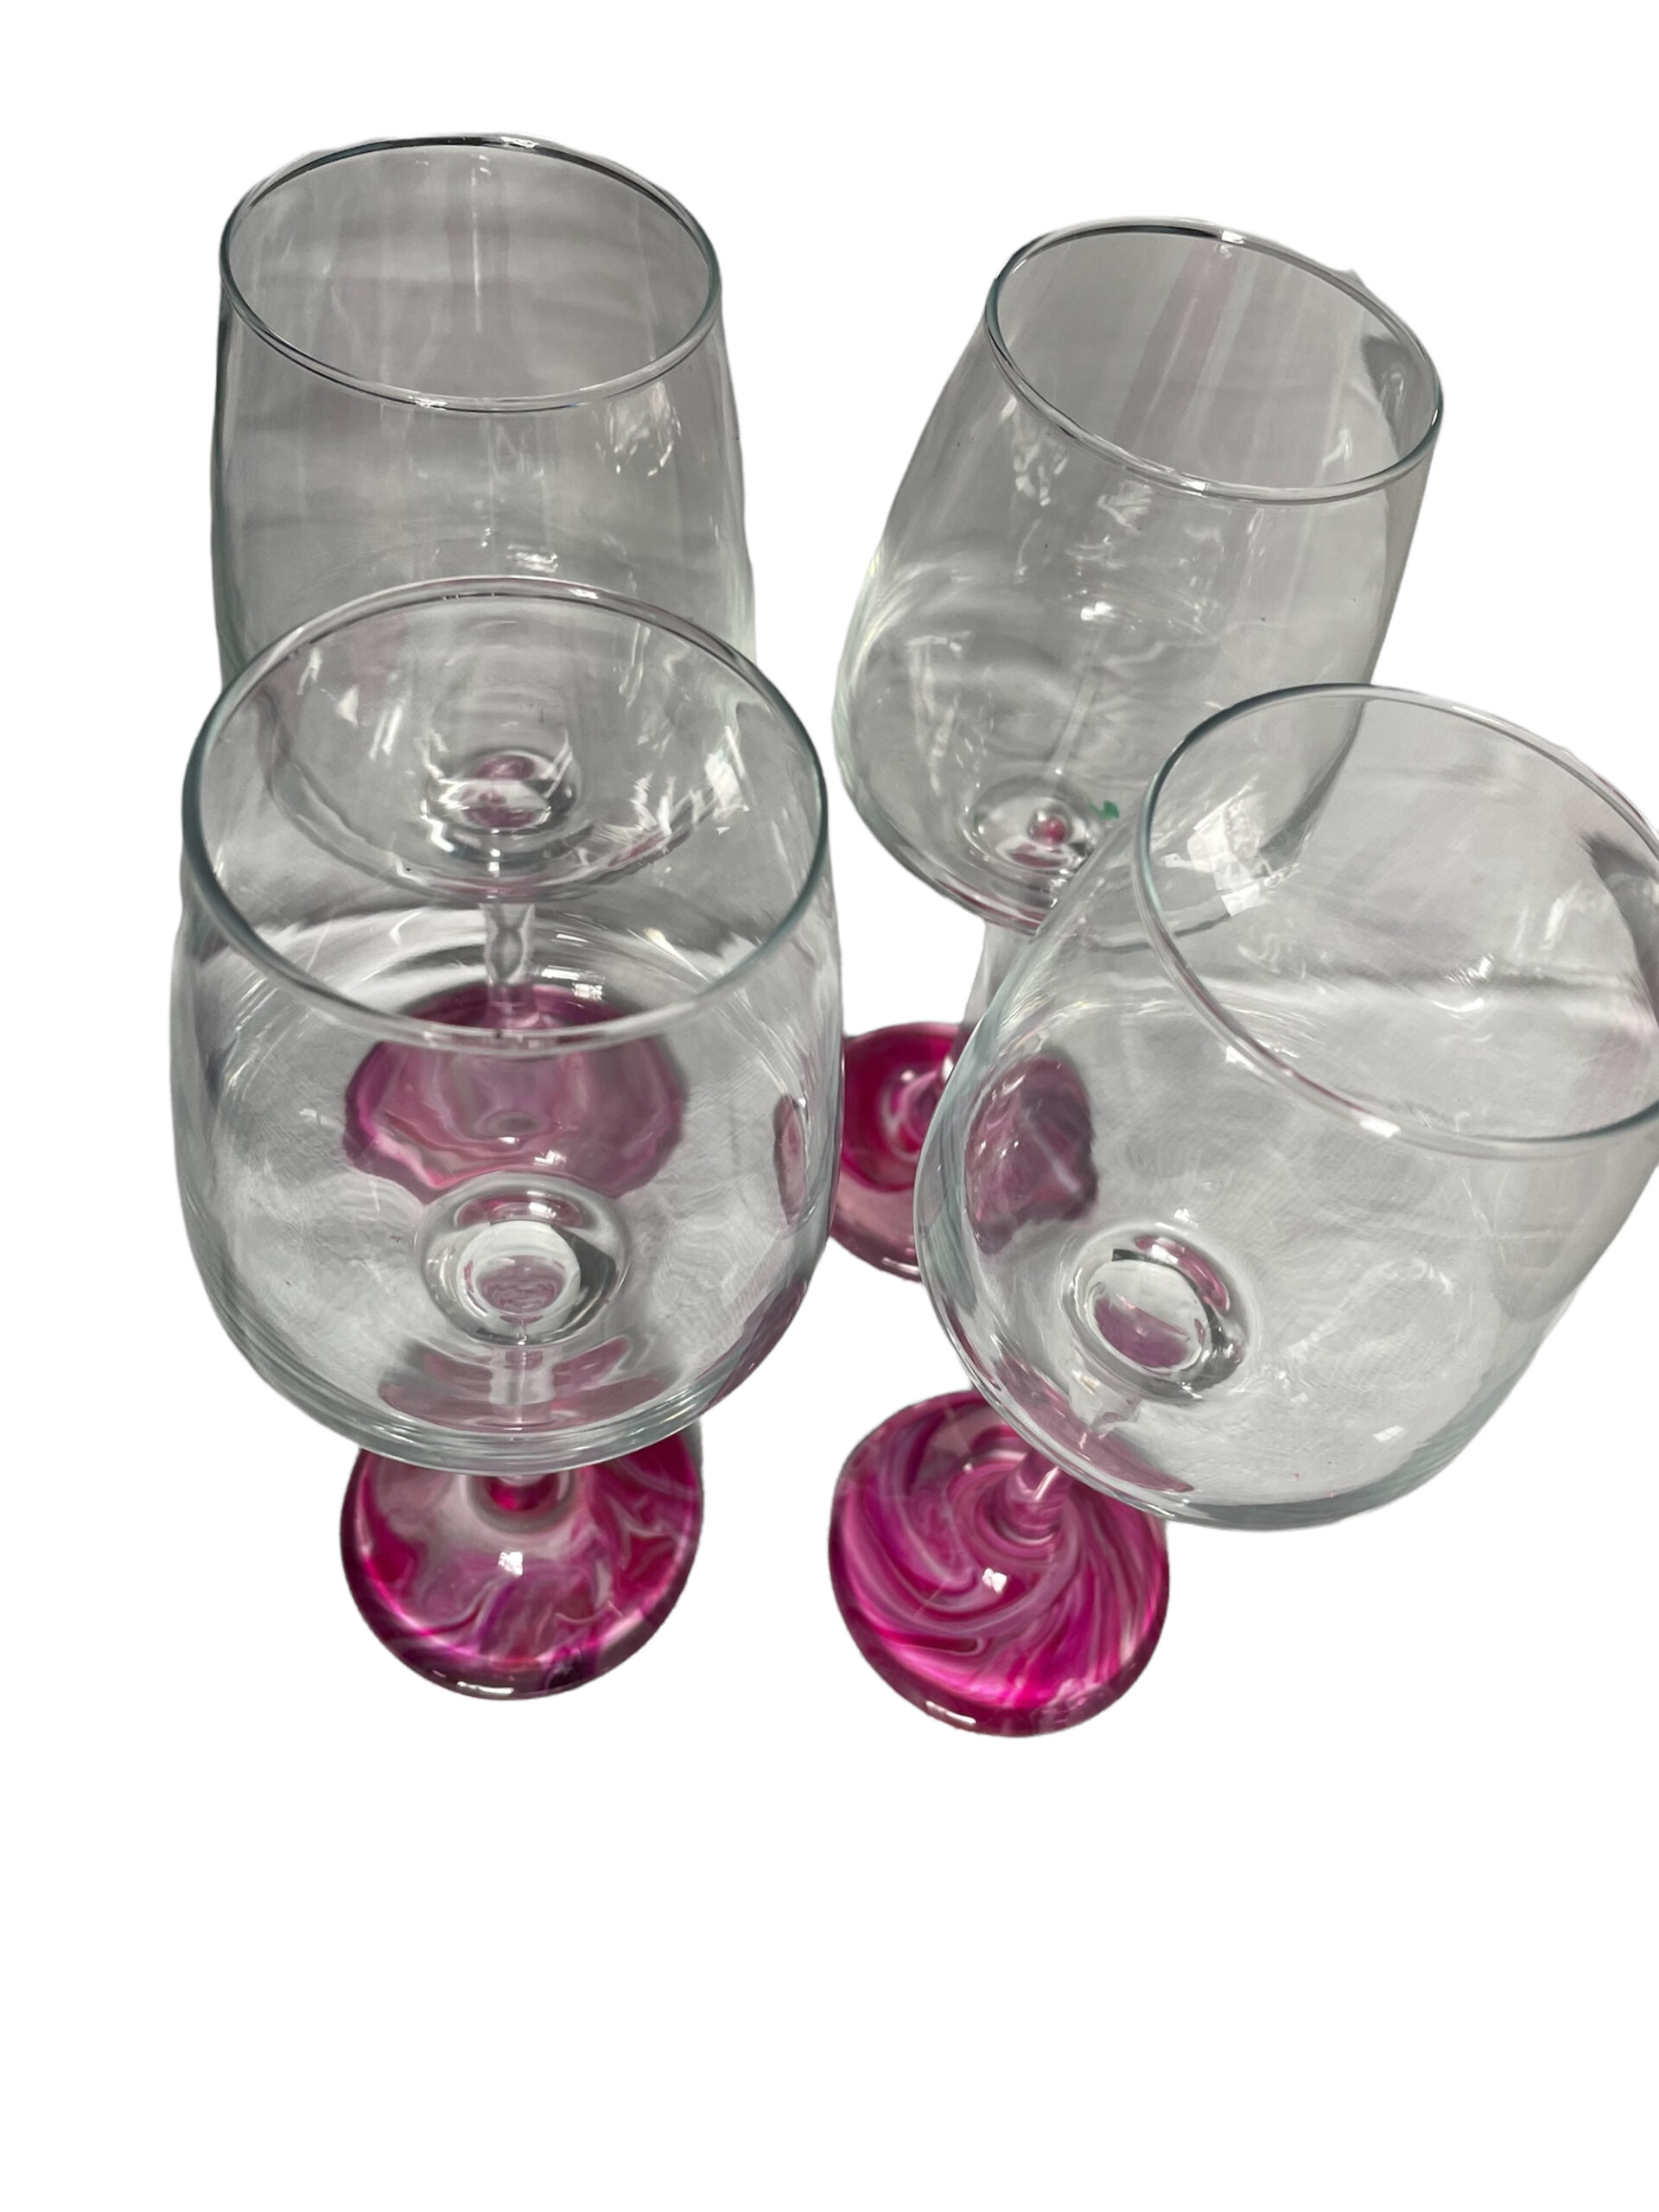 Set of hand painted wine glasses in pinks